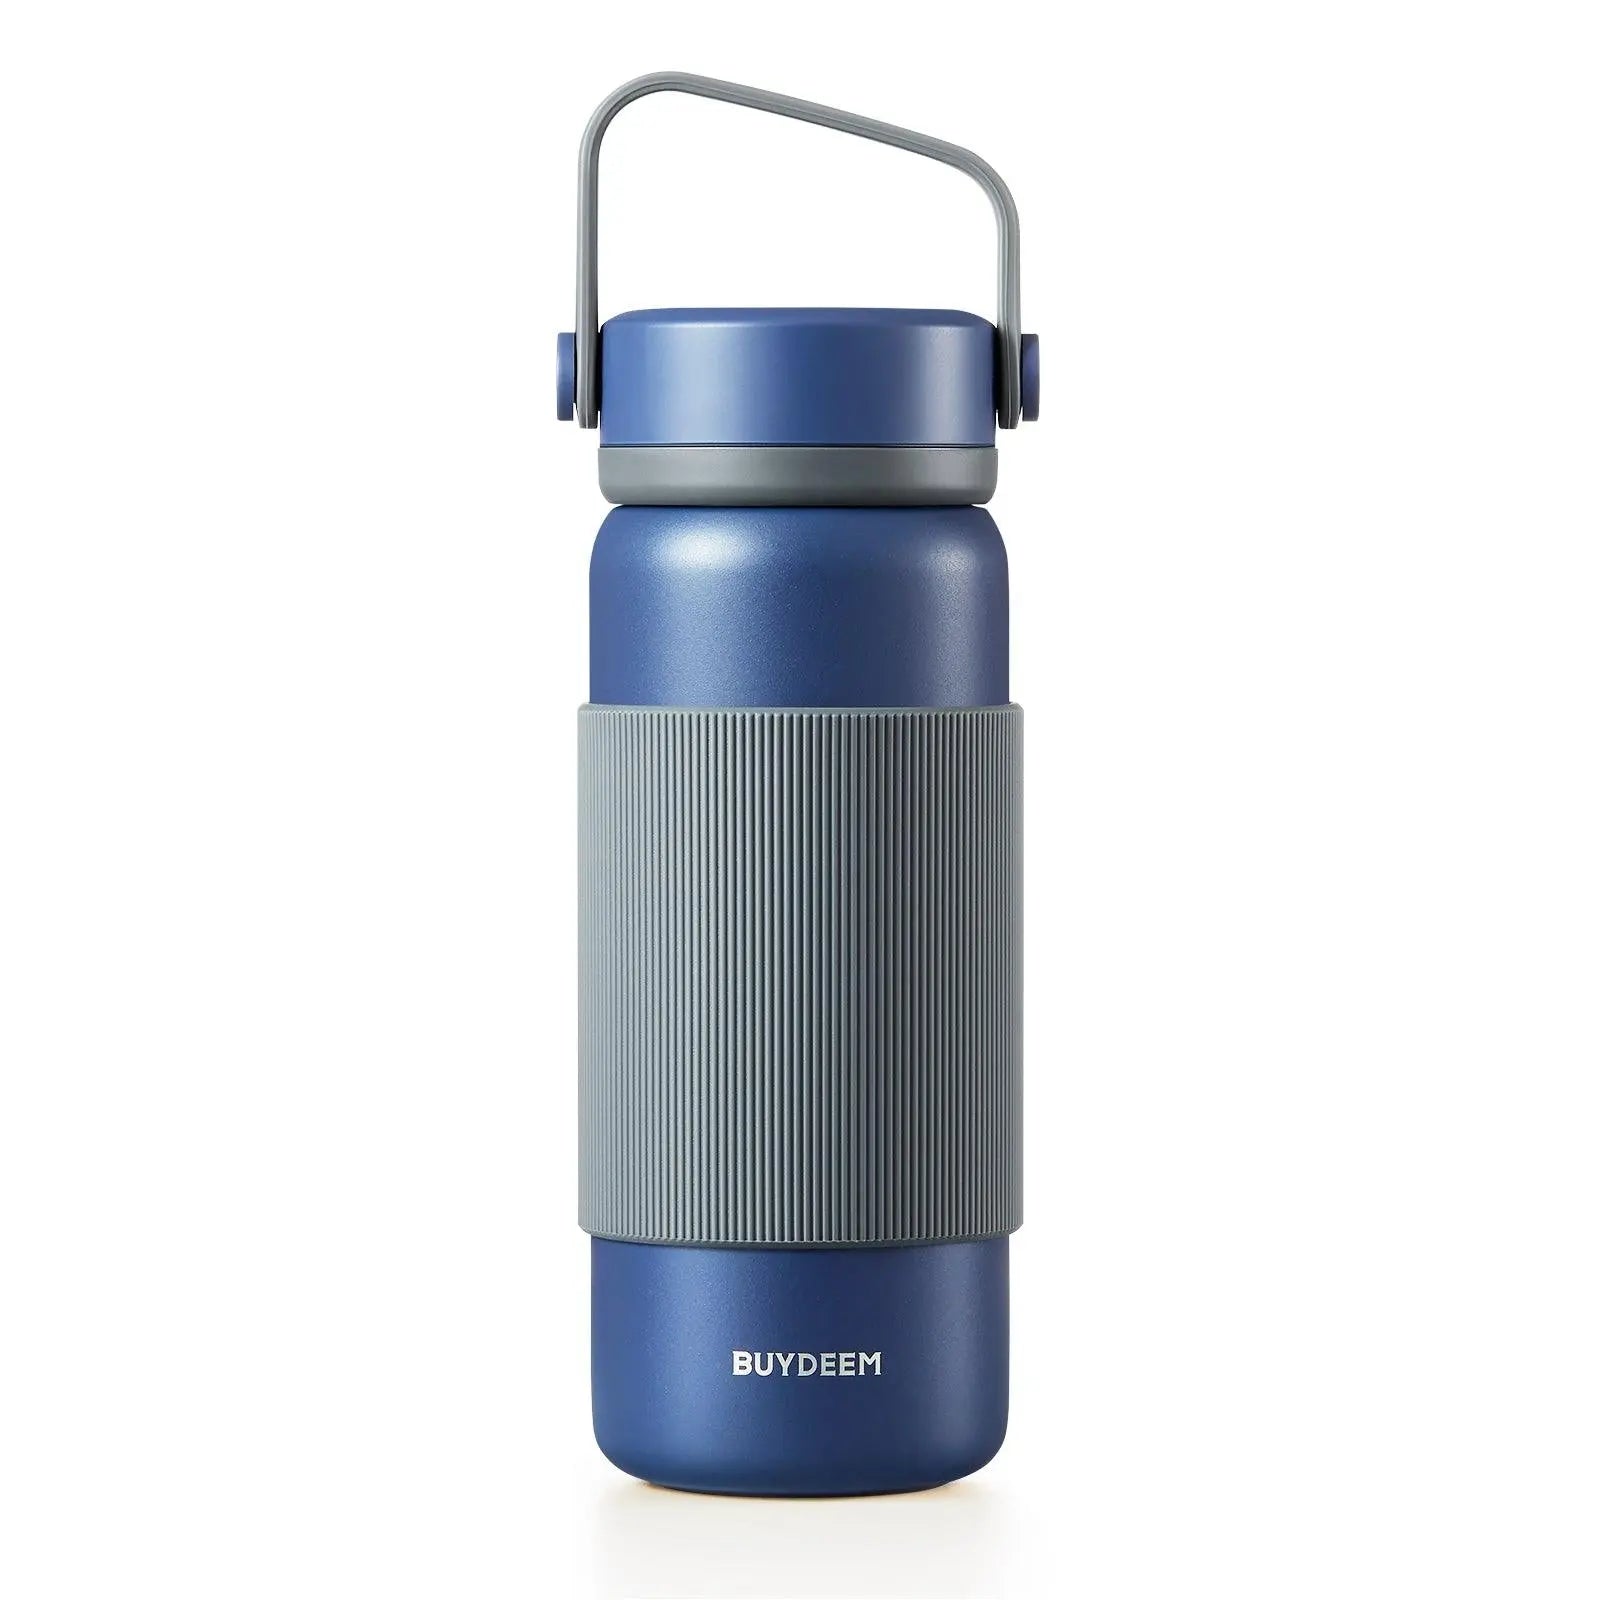 https://us.buydeem.com/cdn/shop/products/BUYDEEM-CD1011-Stainless-Steel-Thermos-Tea-Bottle-with-Removable-Infuser-BuydeemUS-1657519710.jpg?v=1702019148